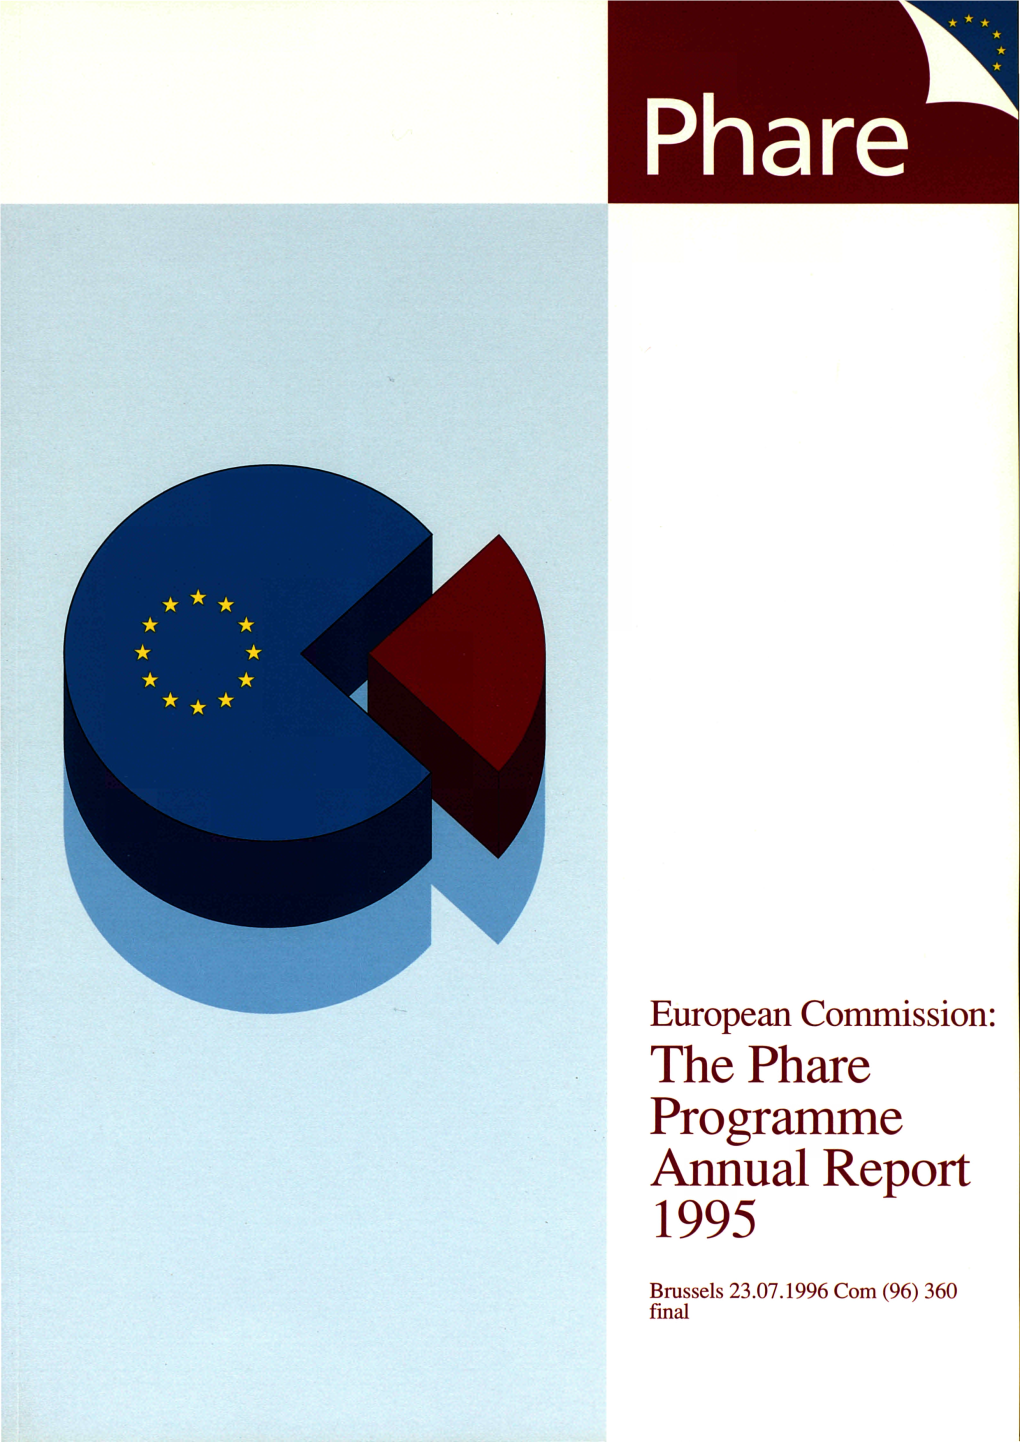 European Commission: the Phare Programme Annual Report 1995 : Brussels 23.07.1996 Com (96) 360 Final